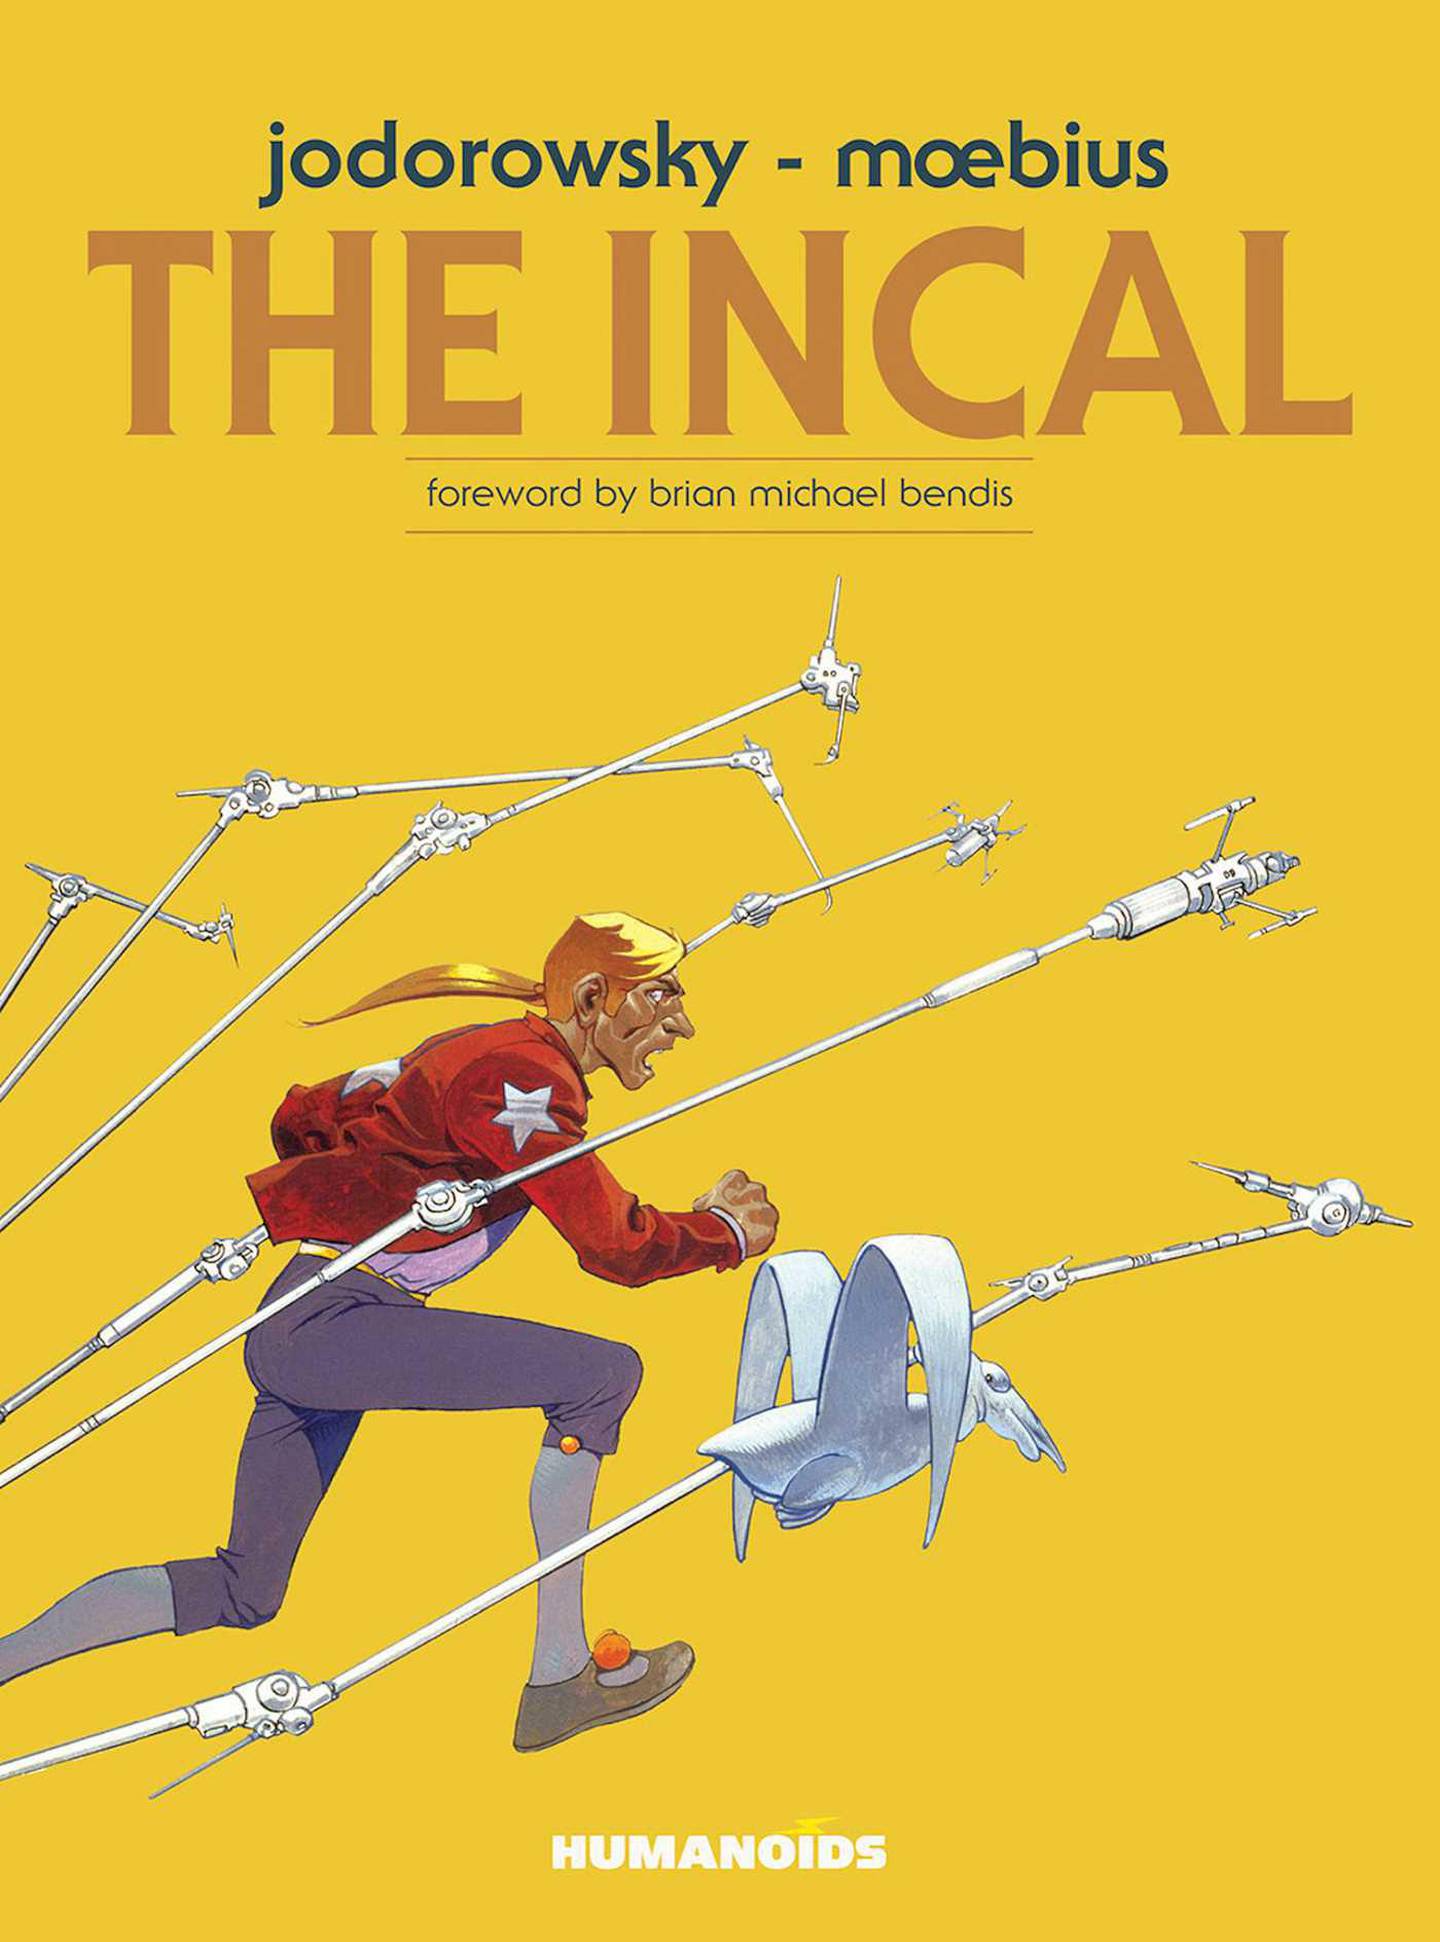 The Incal by Alejandro Jodorowsky; Illustrated by Jean Giraud published by Humanoids, Inc. Courtesy Simon & Schuster